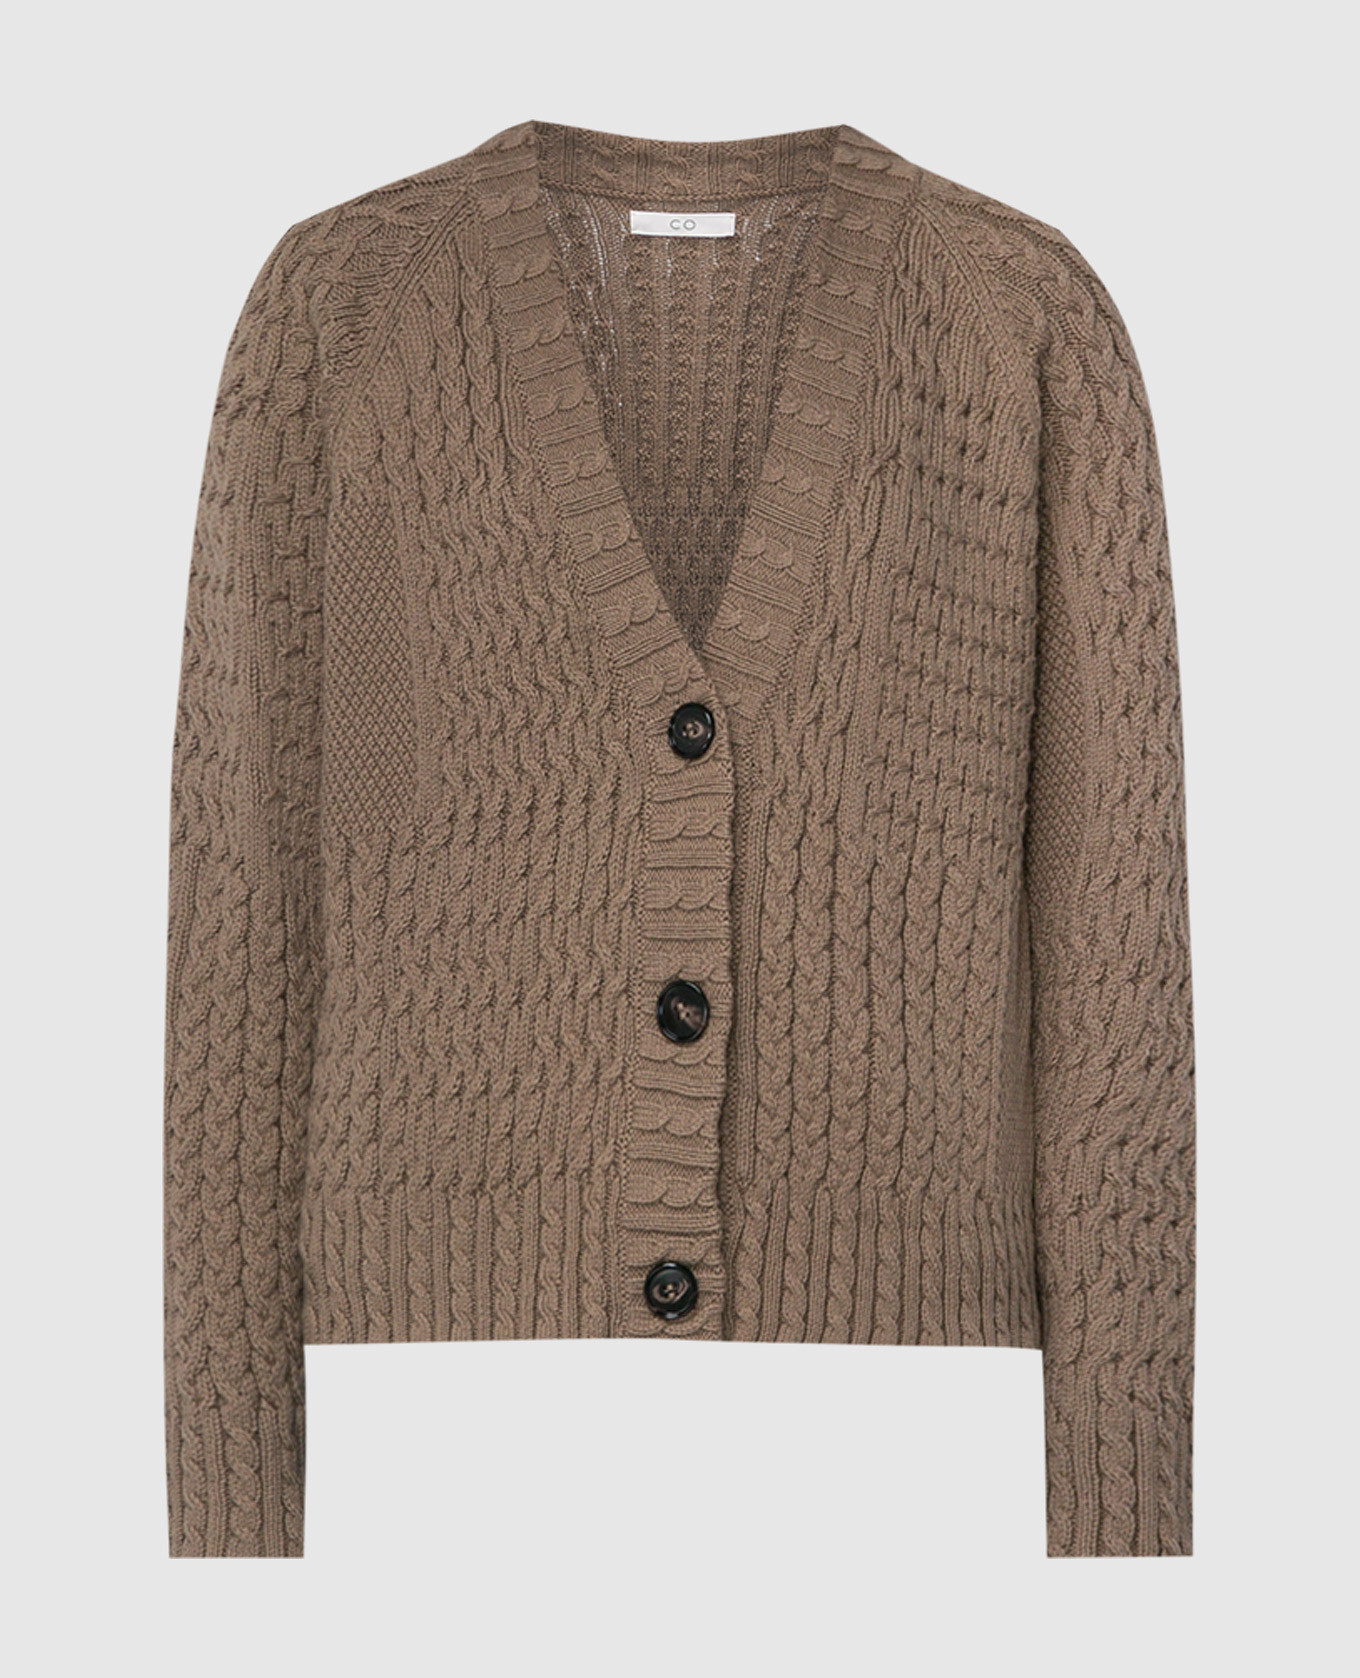 Cardigan with a textured khaki pattern